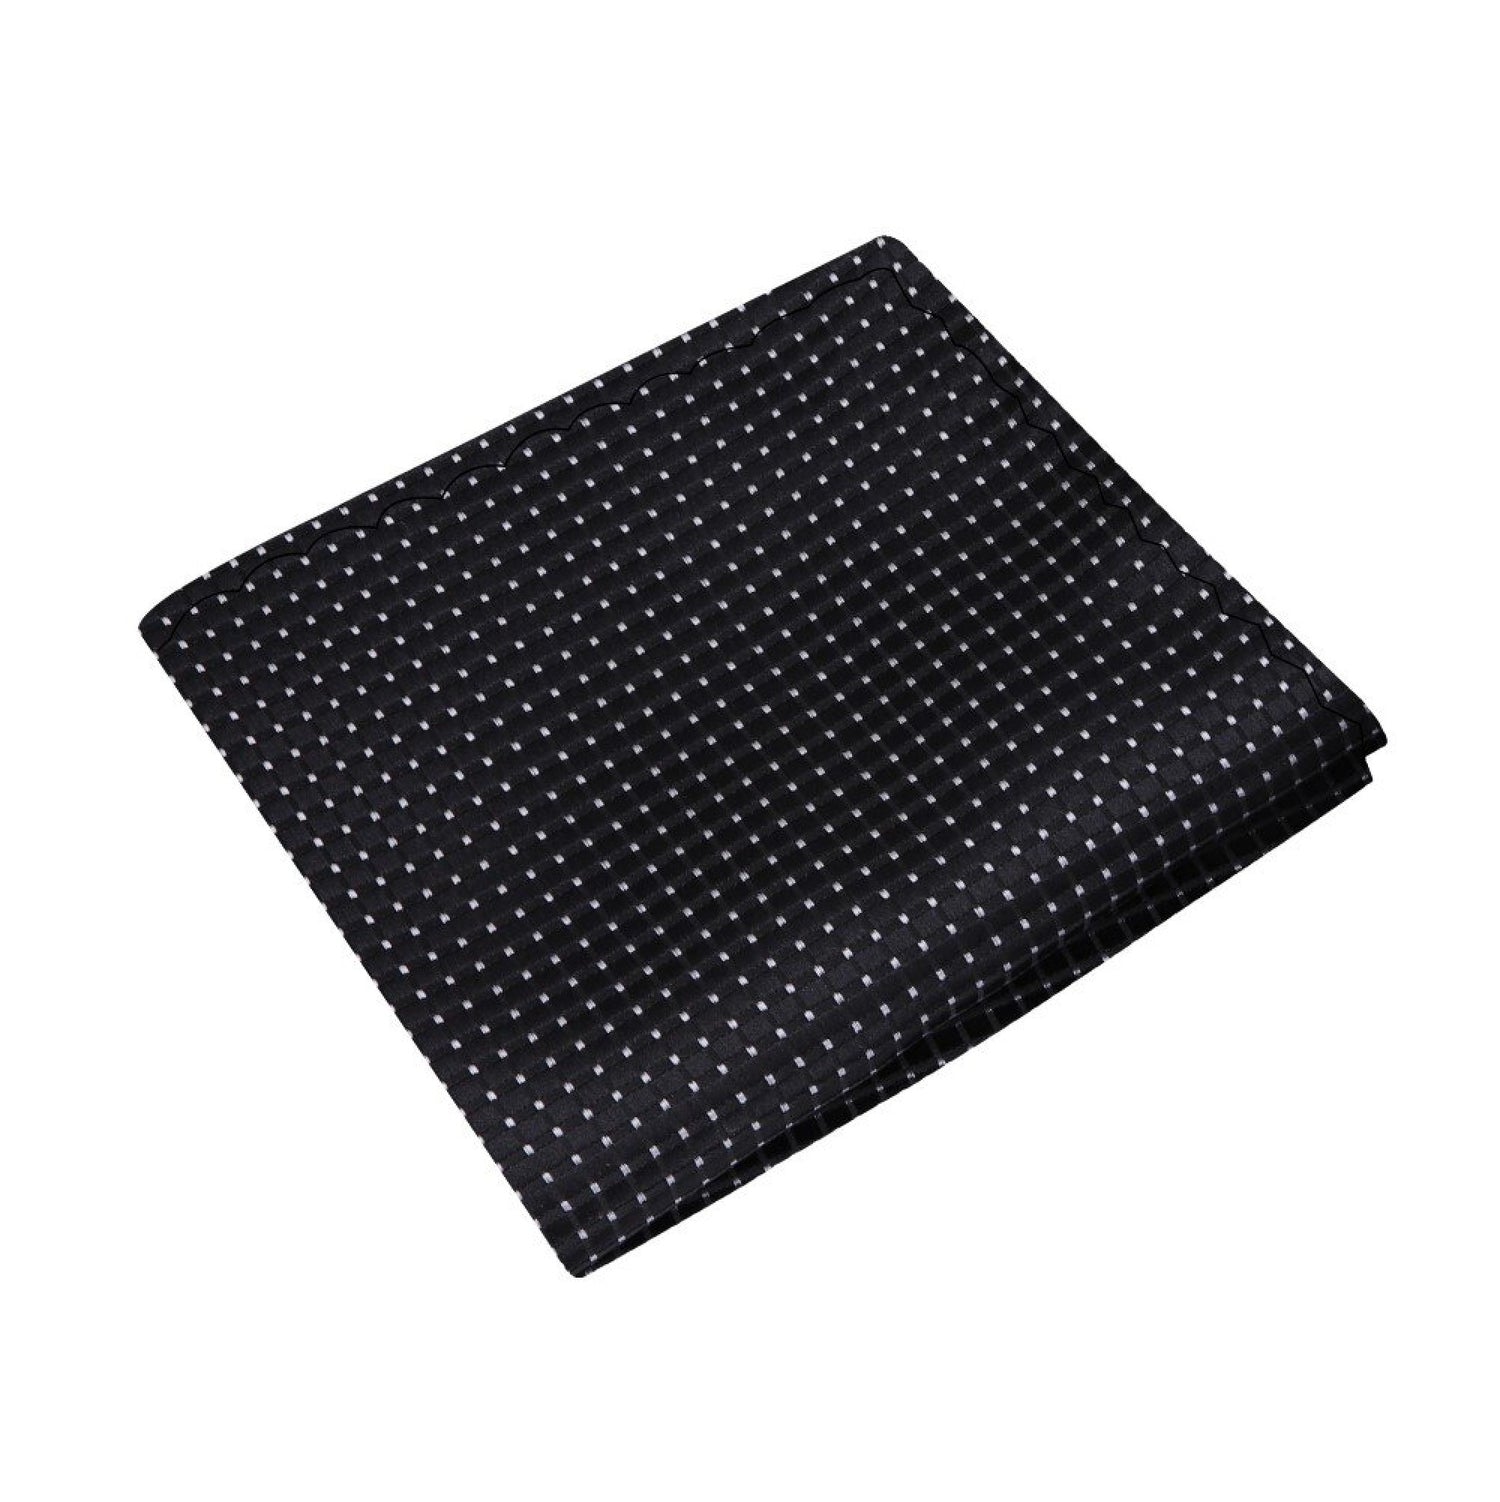 View 2 Black, White Color Small Geometric with Check Pattern Silk Pocket Square